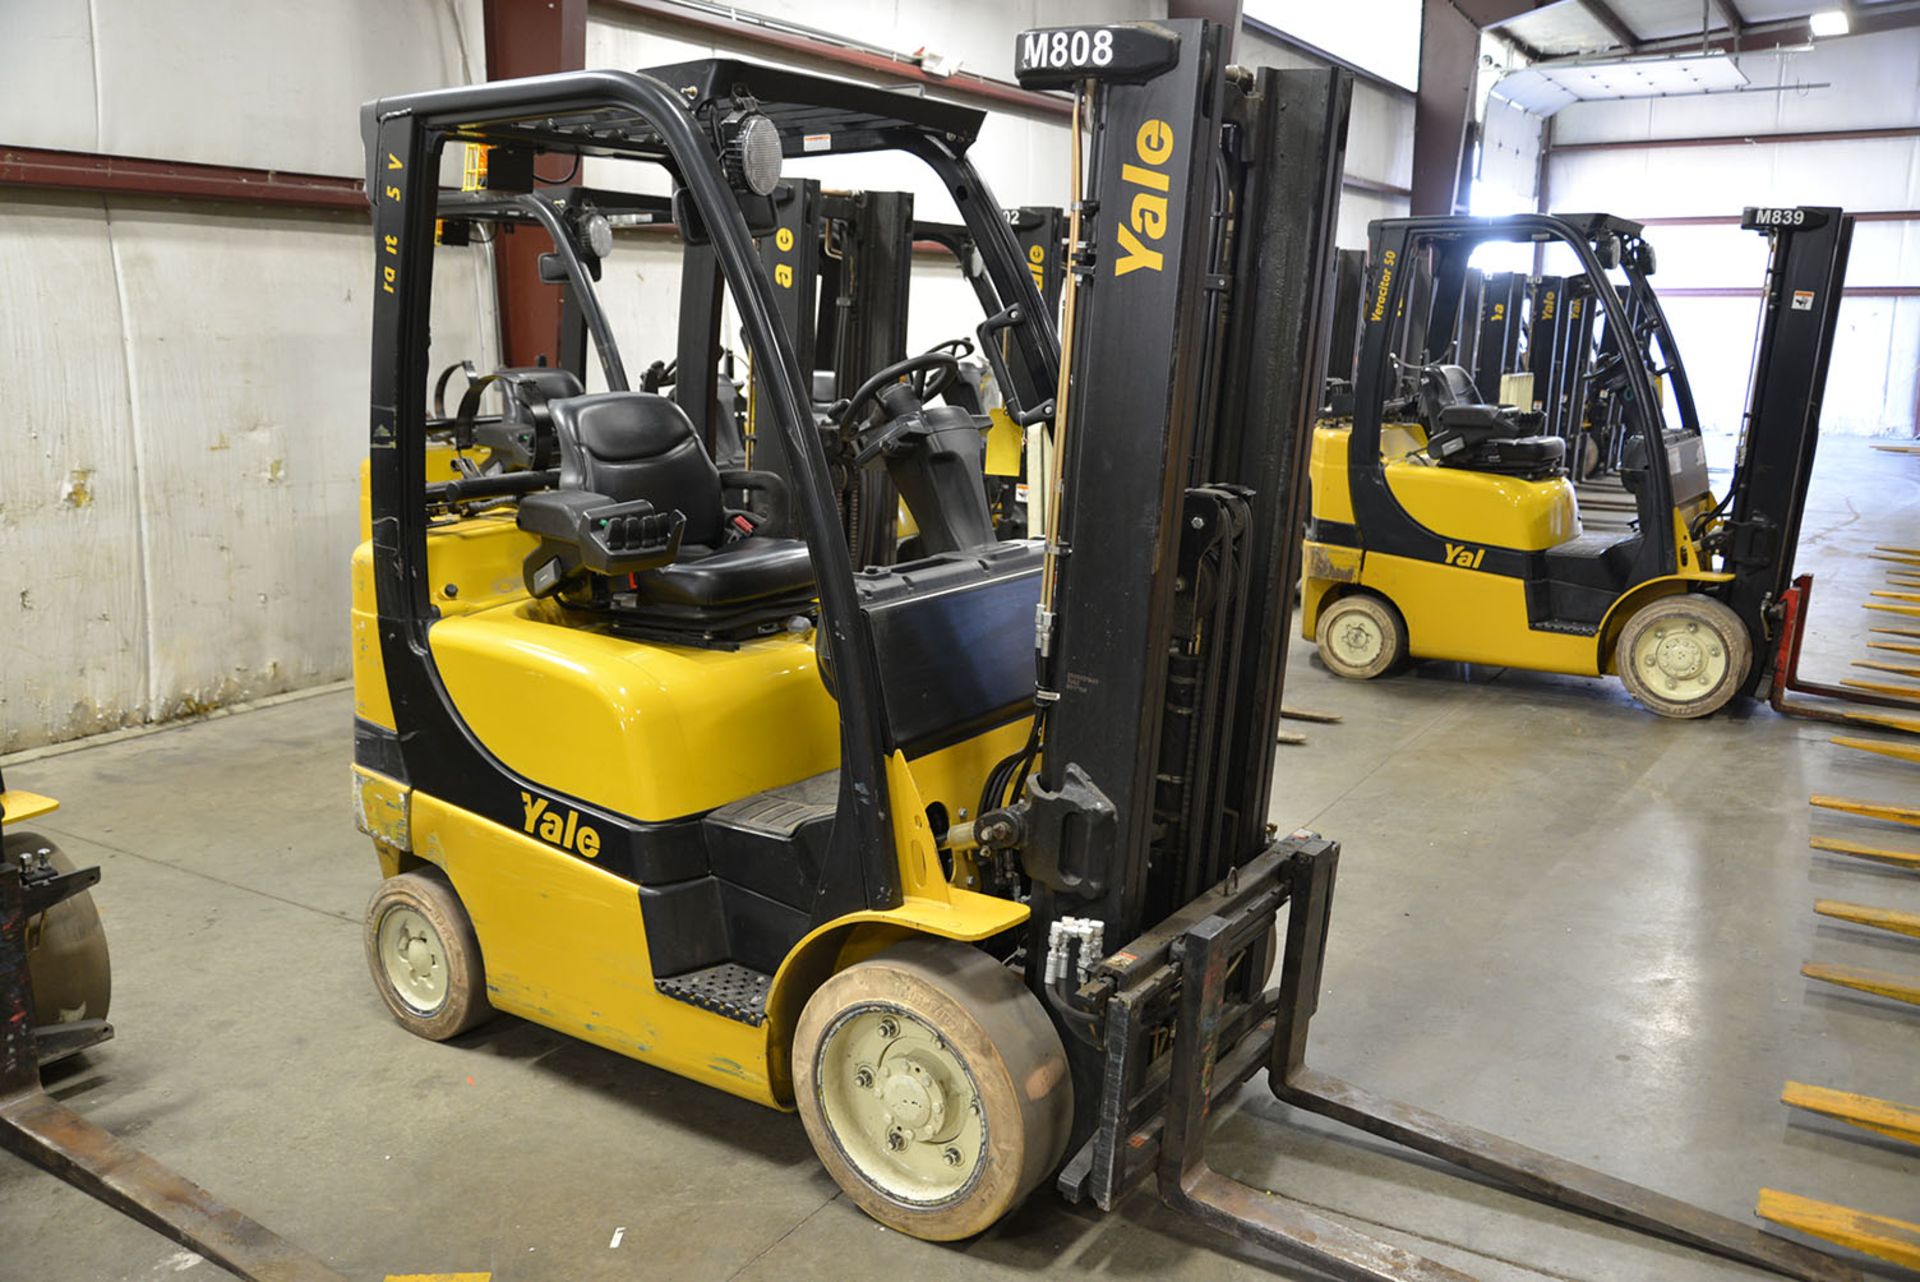 2008 YALE 5,000-lb. Capacity Forklift, Model GLC050VXNV, S/N A910V13928F, LPG, Solid Non-Marking - Image 4 of 7